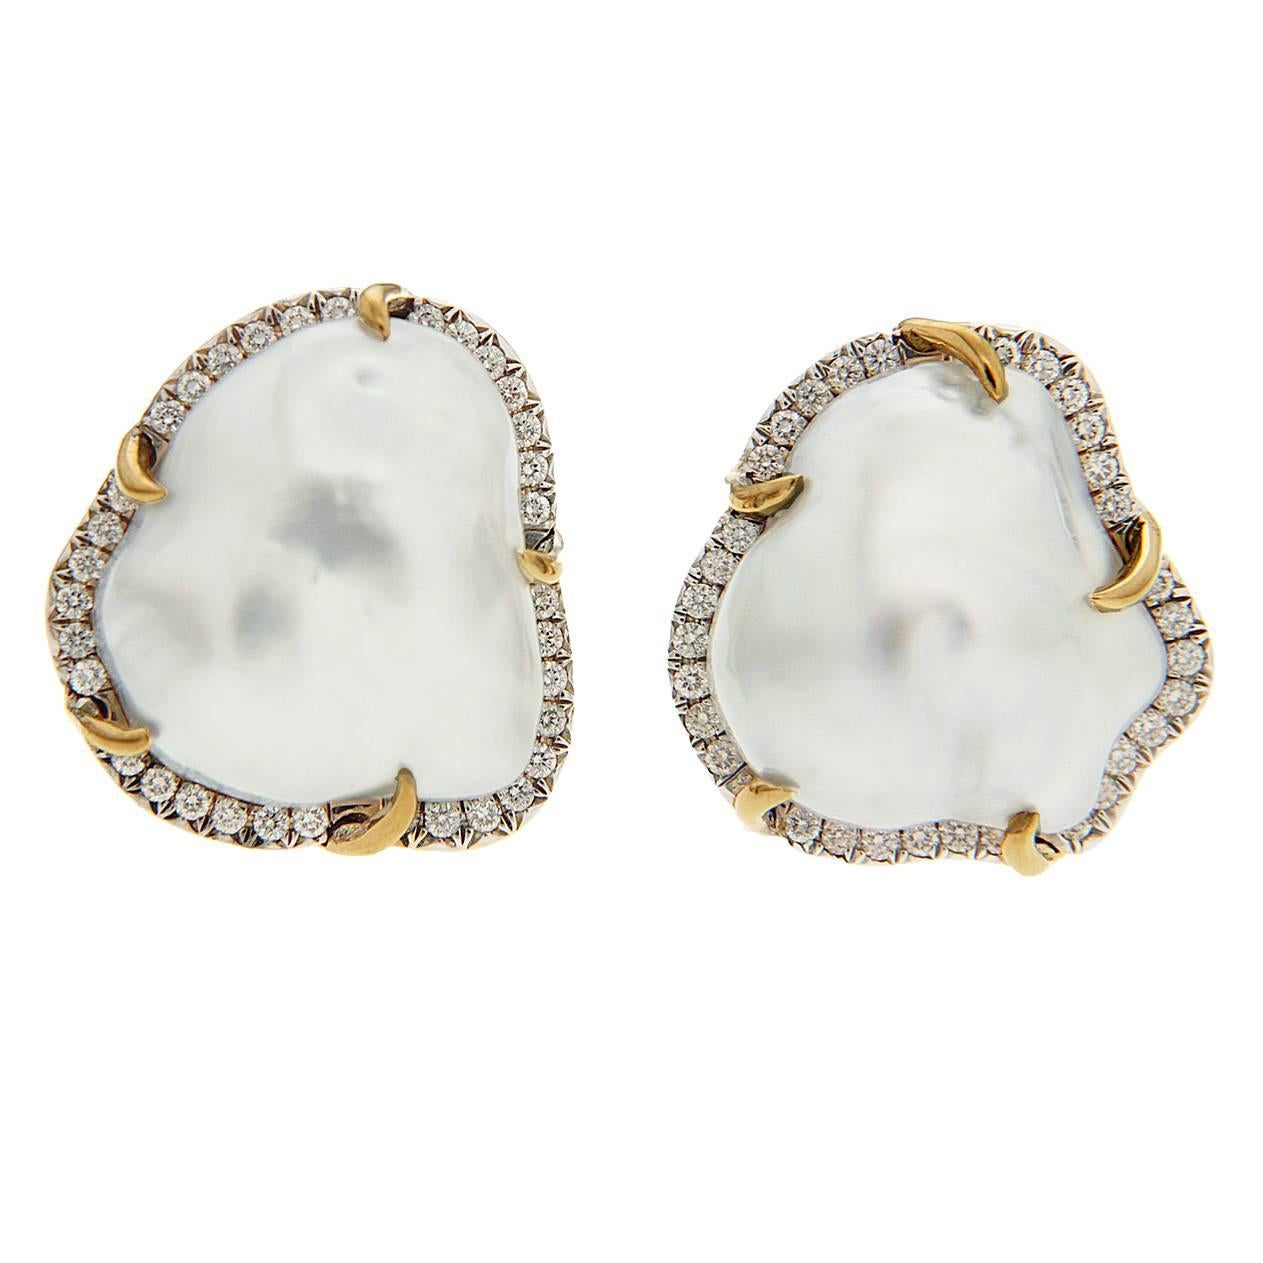 Baroque Pearl Earrings with Pave Diamond and Gold Claws